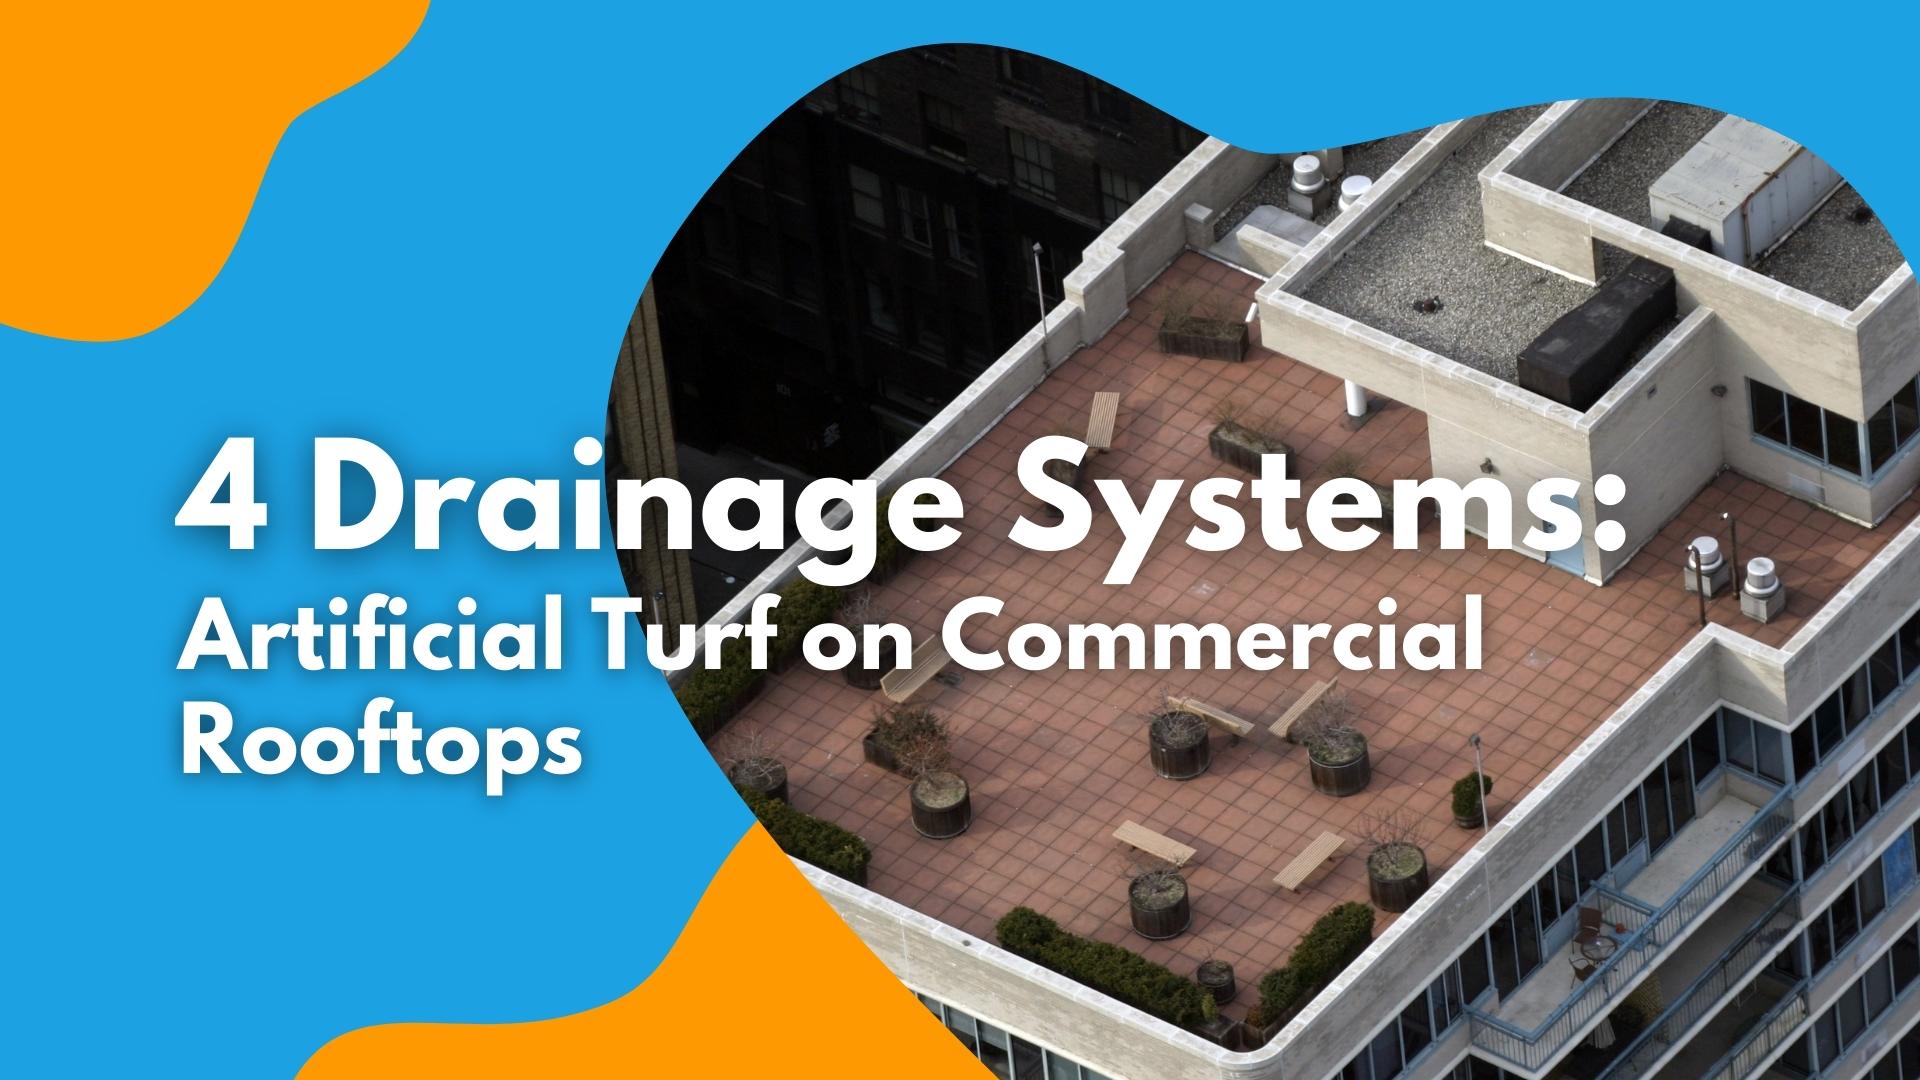 4 drainage systems used to install artificial grass on commercial rooftops